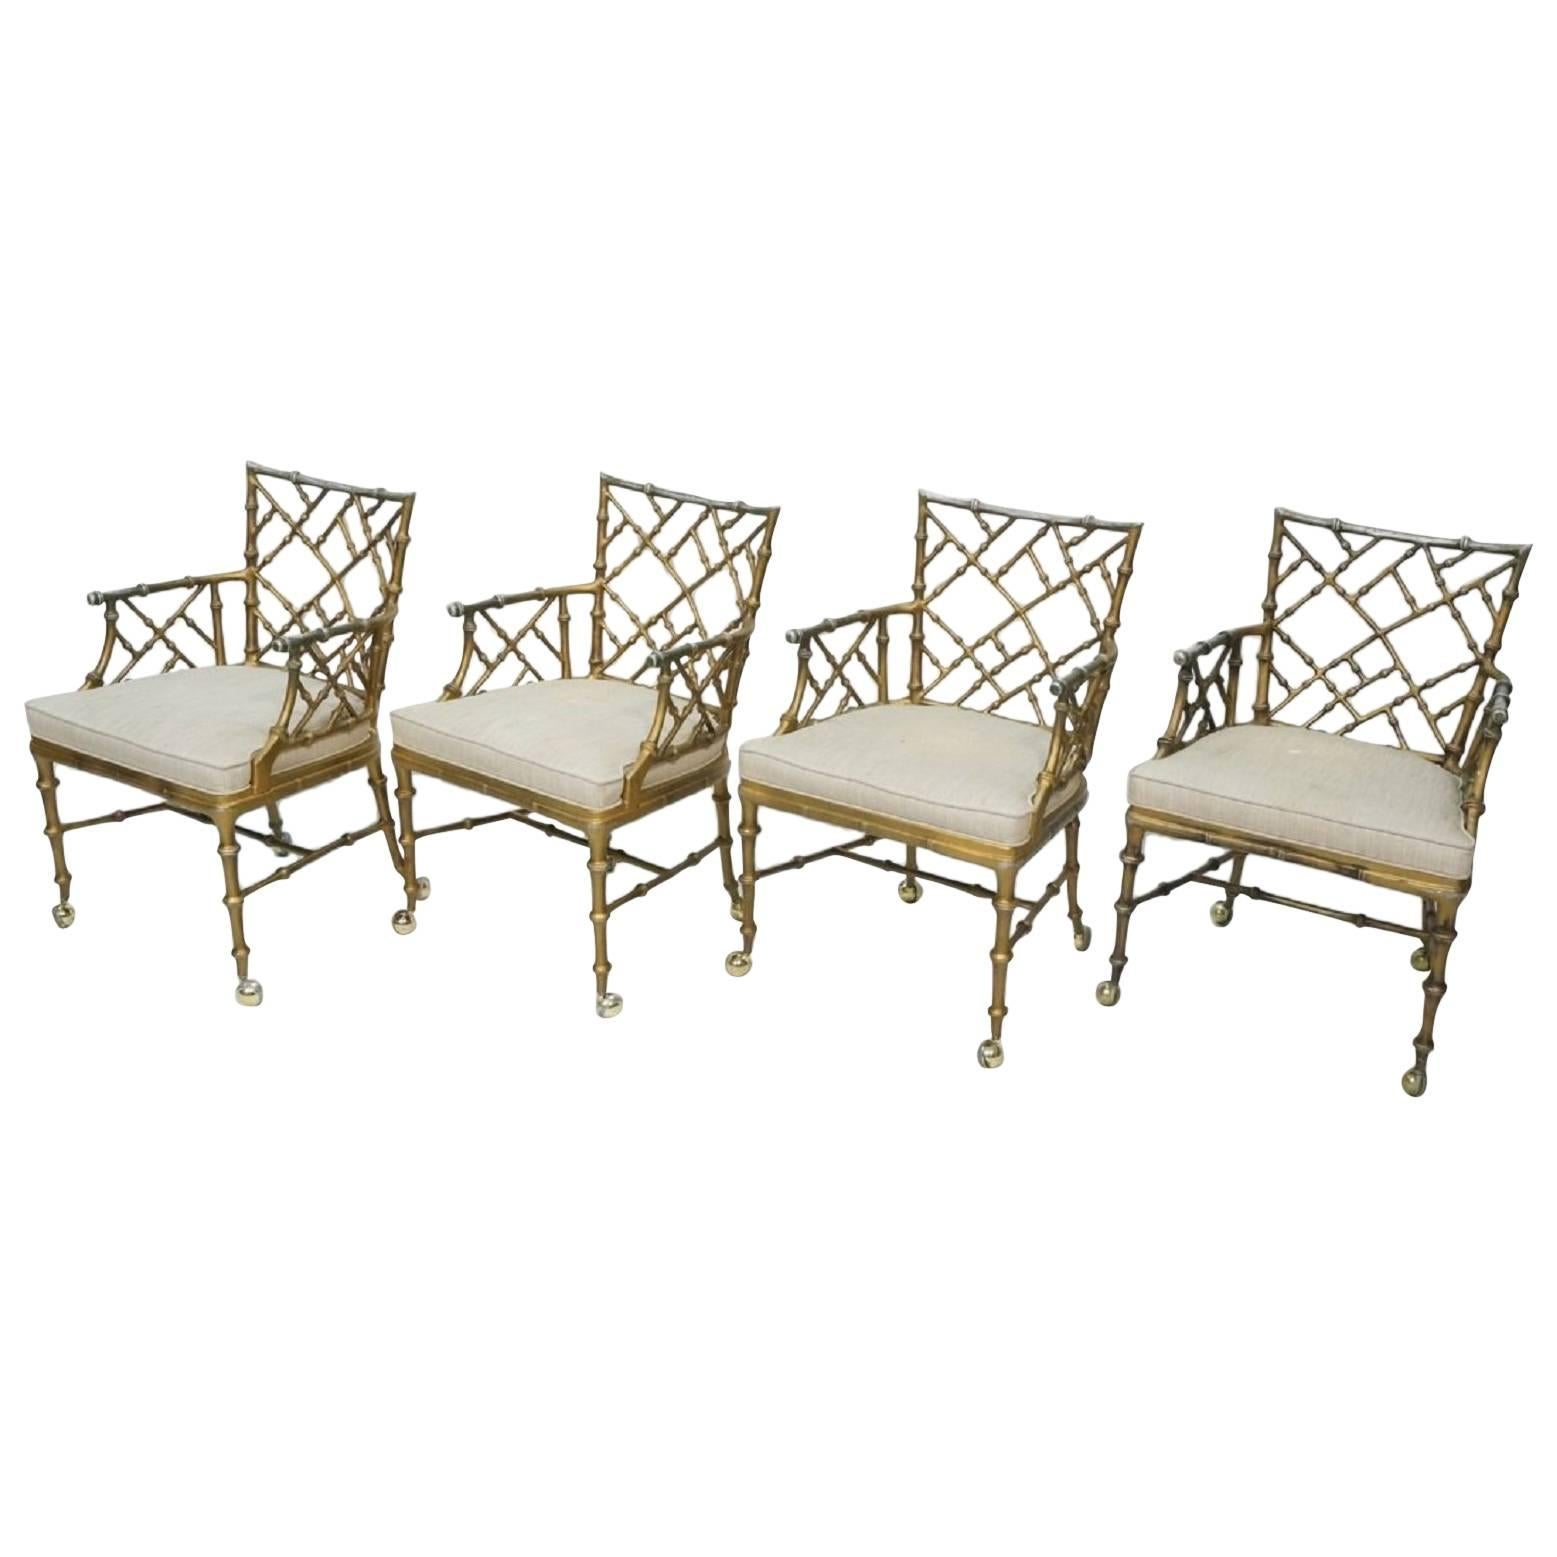 Set of Four Vintage Metal Bamboo Armchairs by Phyllis Morris For Sale